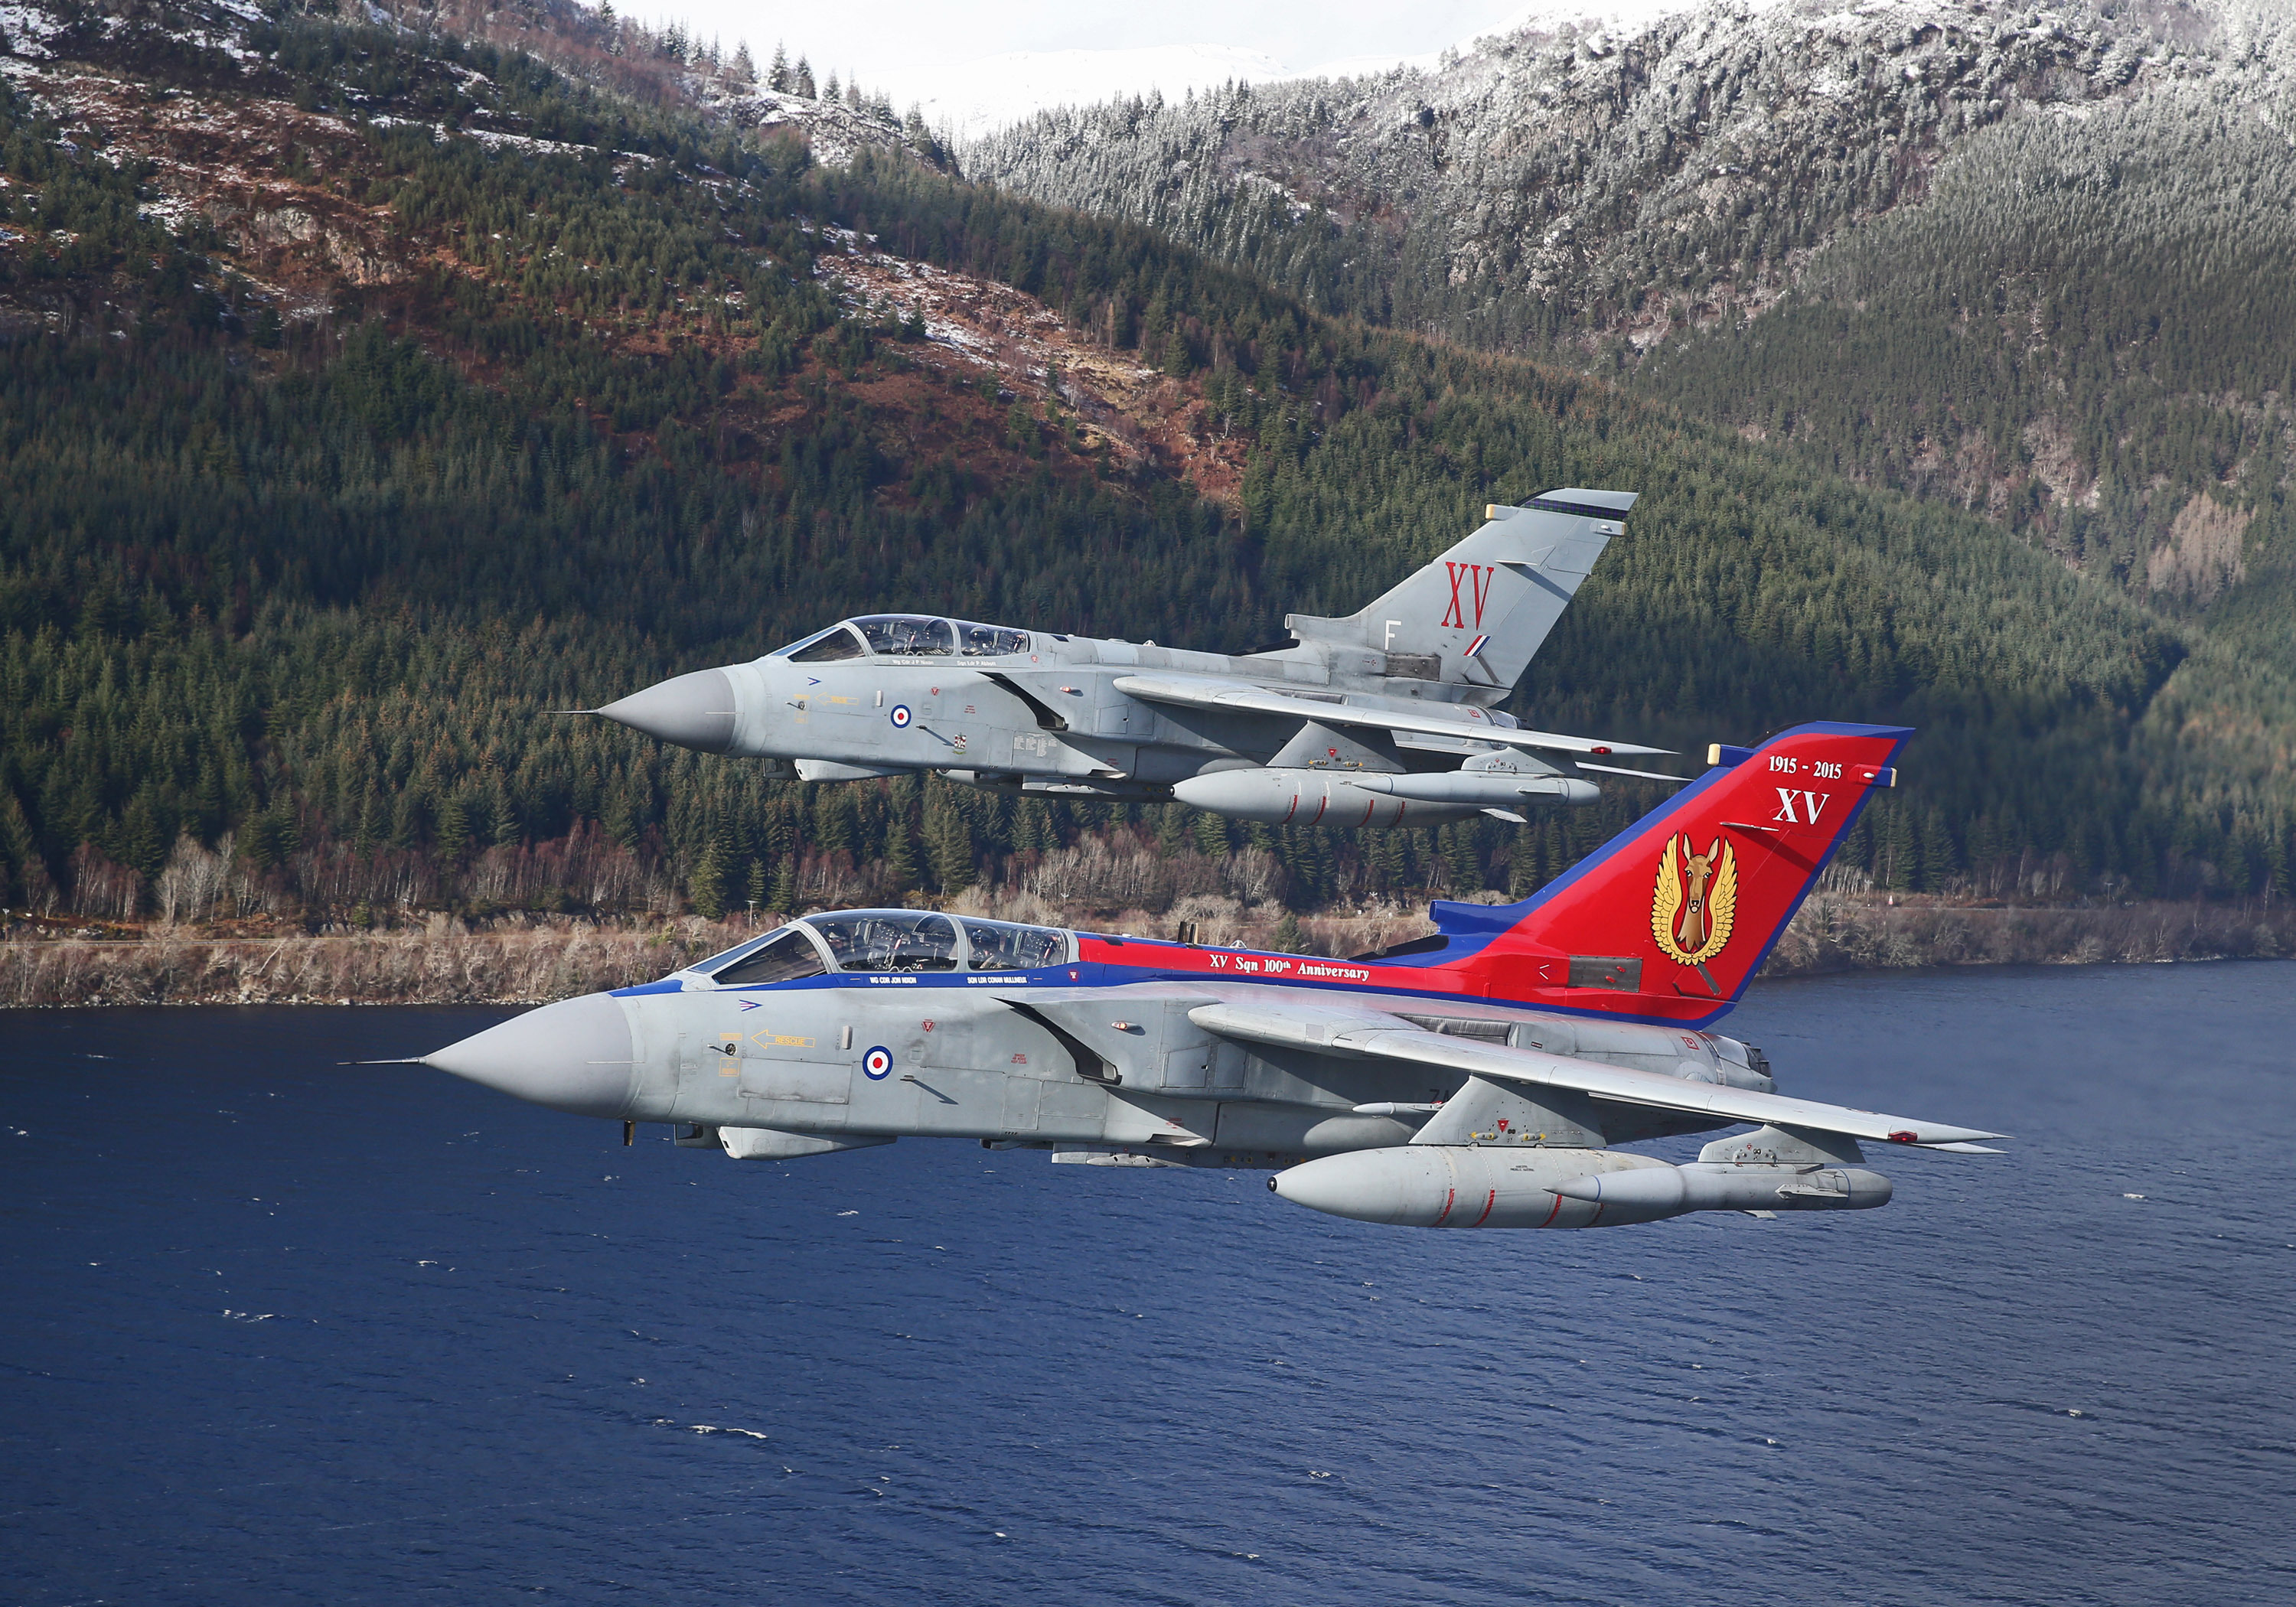 XV Sqn 100th Anniversary Paint job on GR4, Images taken over Loch Ness and the Highlands.